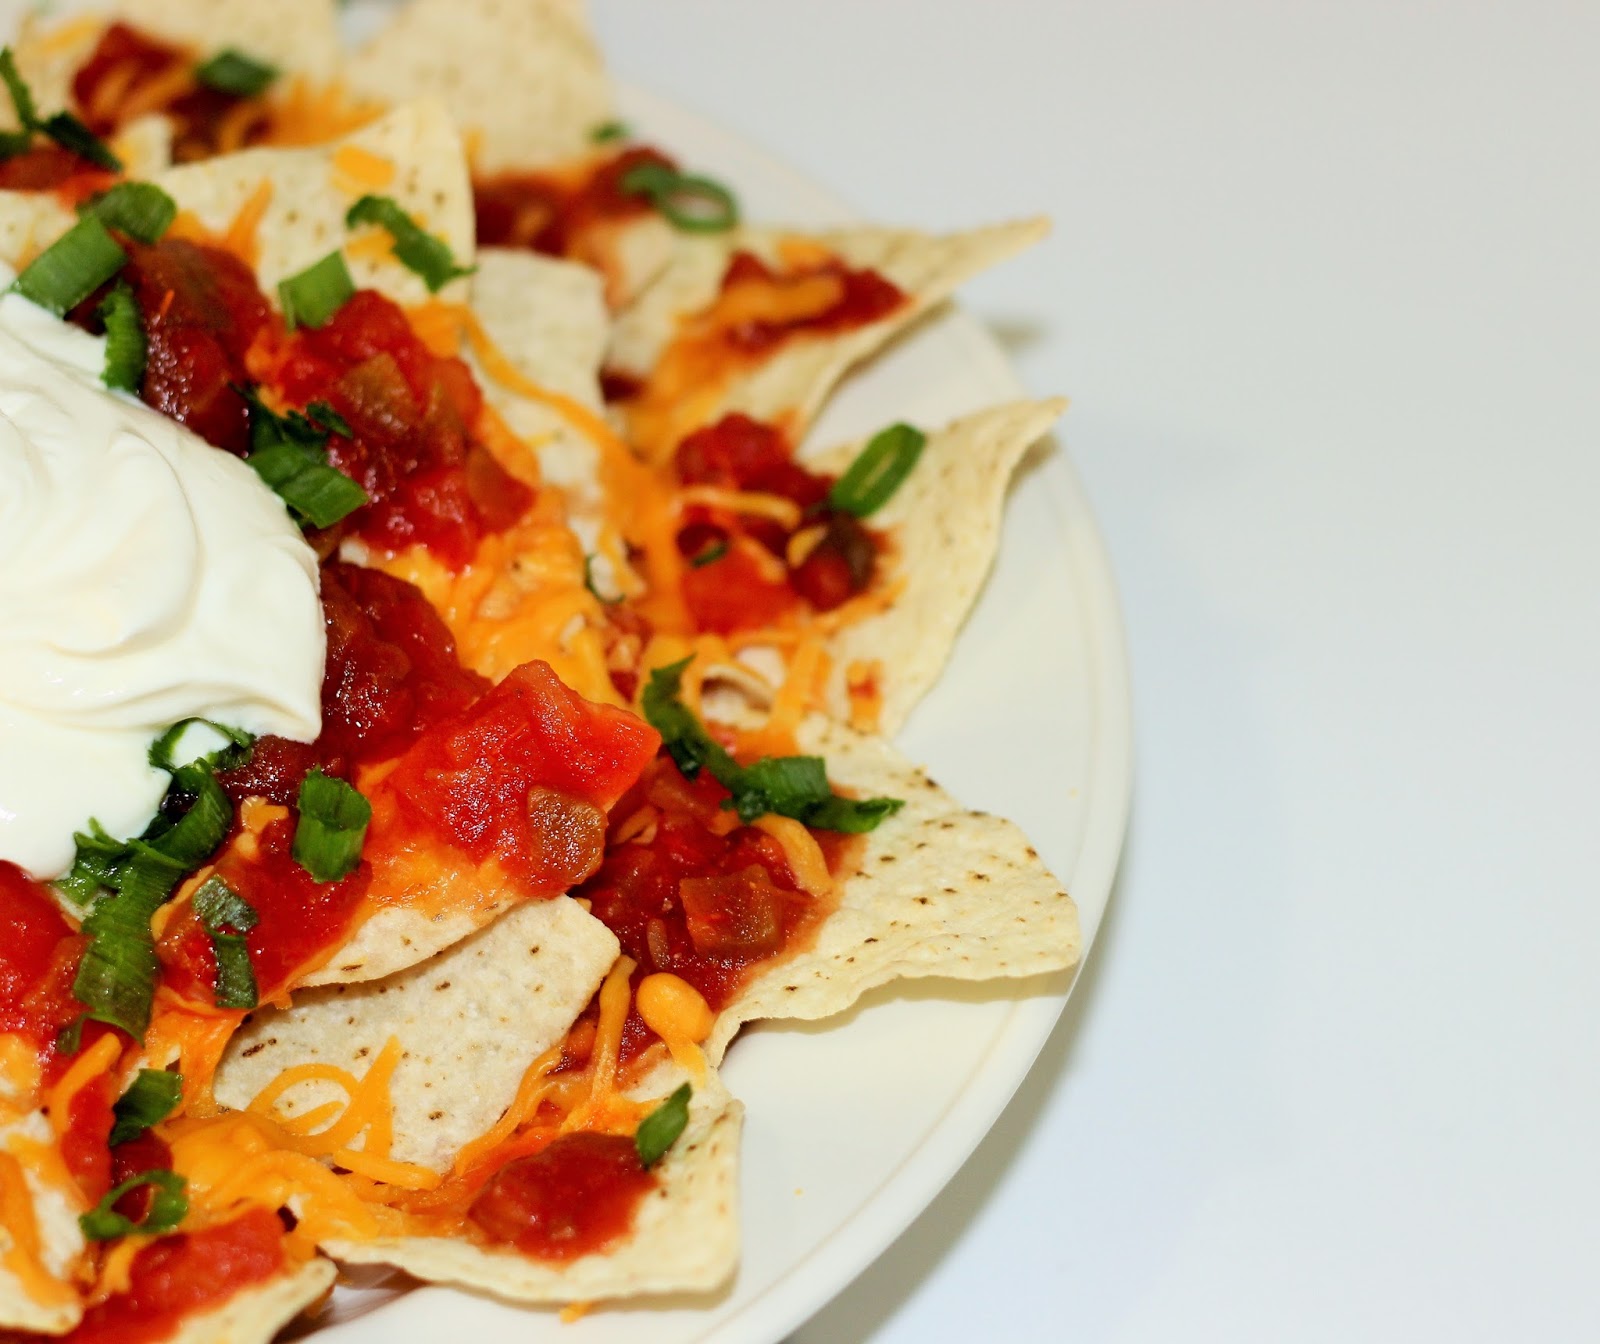 My Delicious Homemade Nachos Recipe With Layer-By-Layer Technique